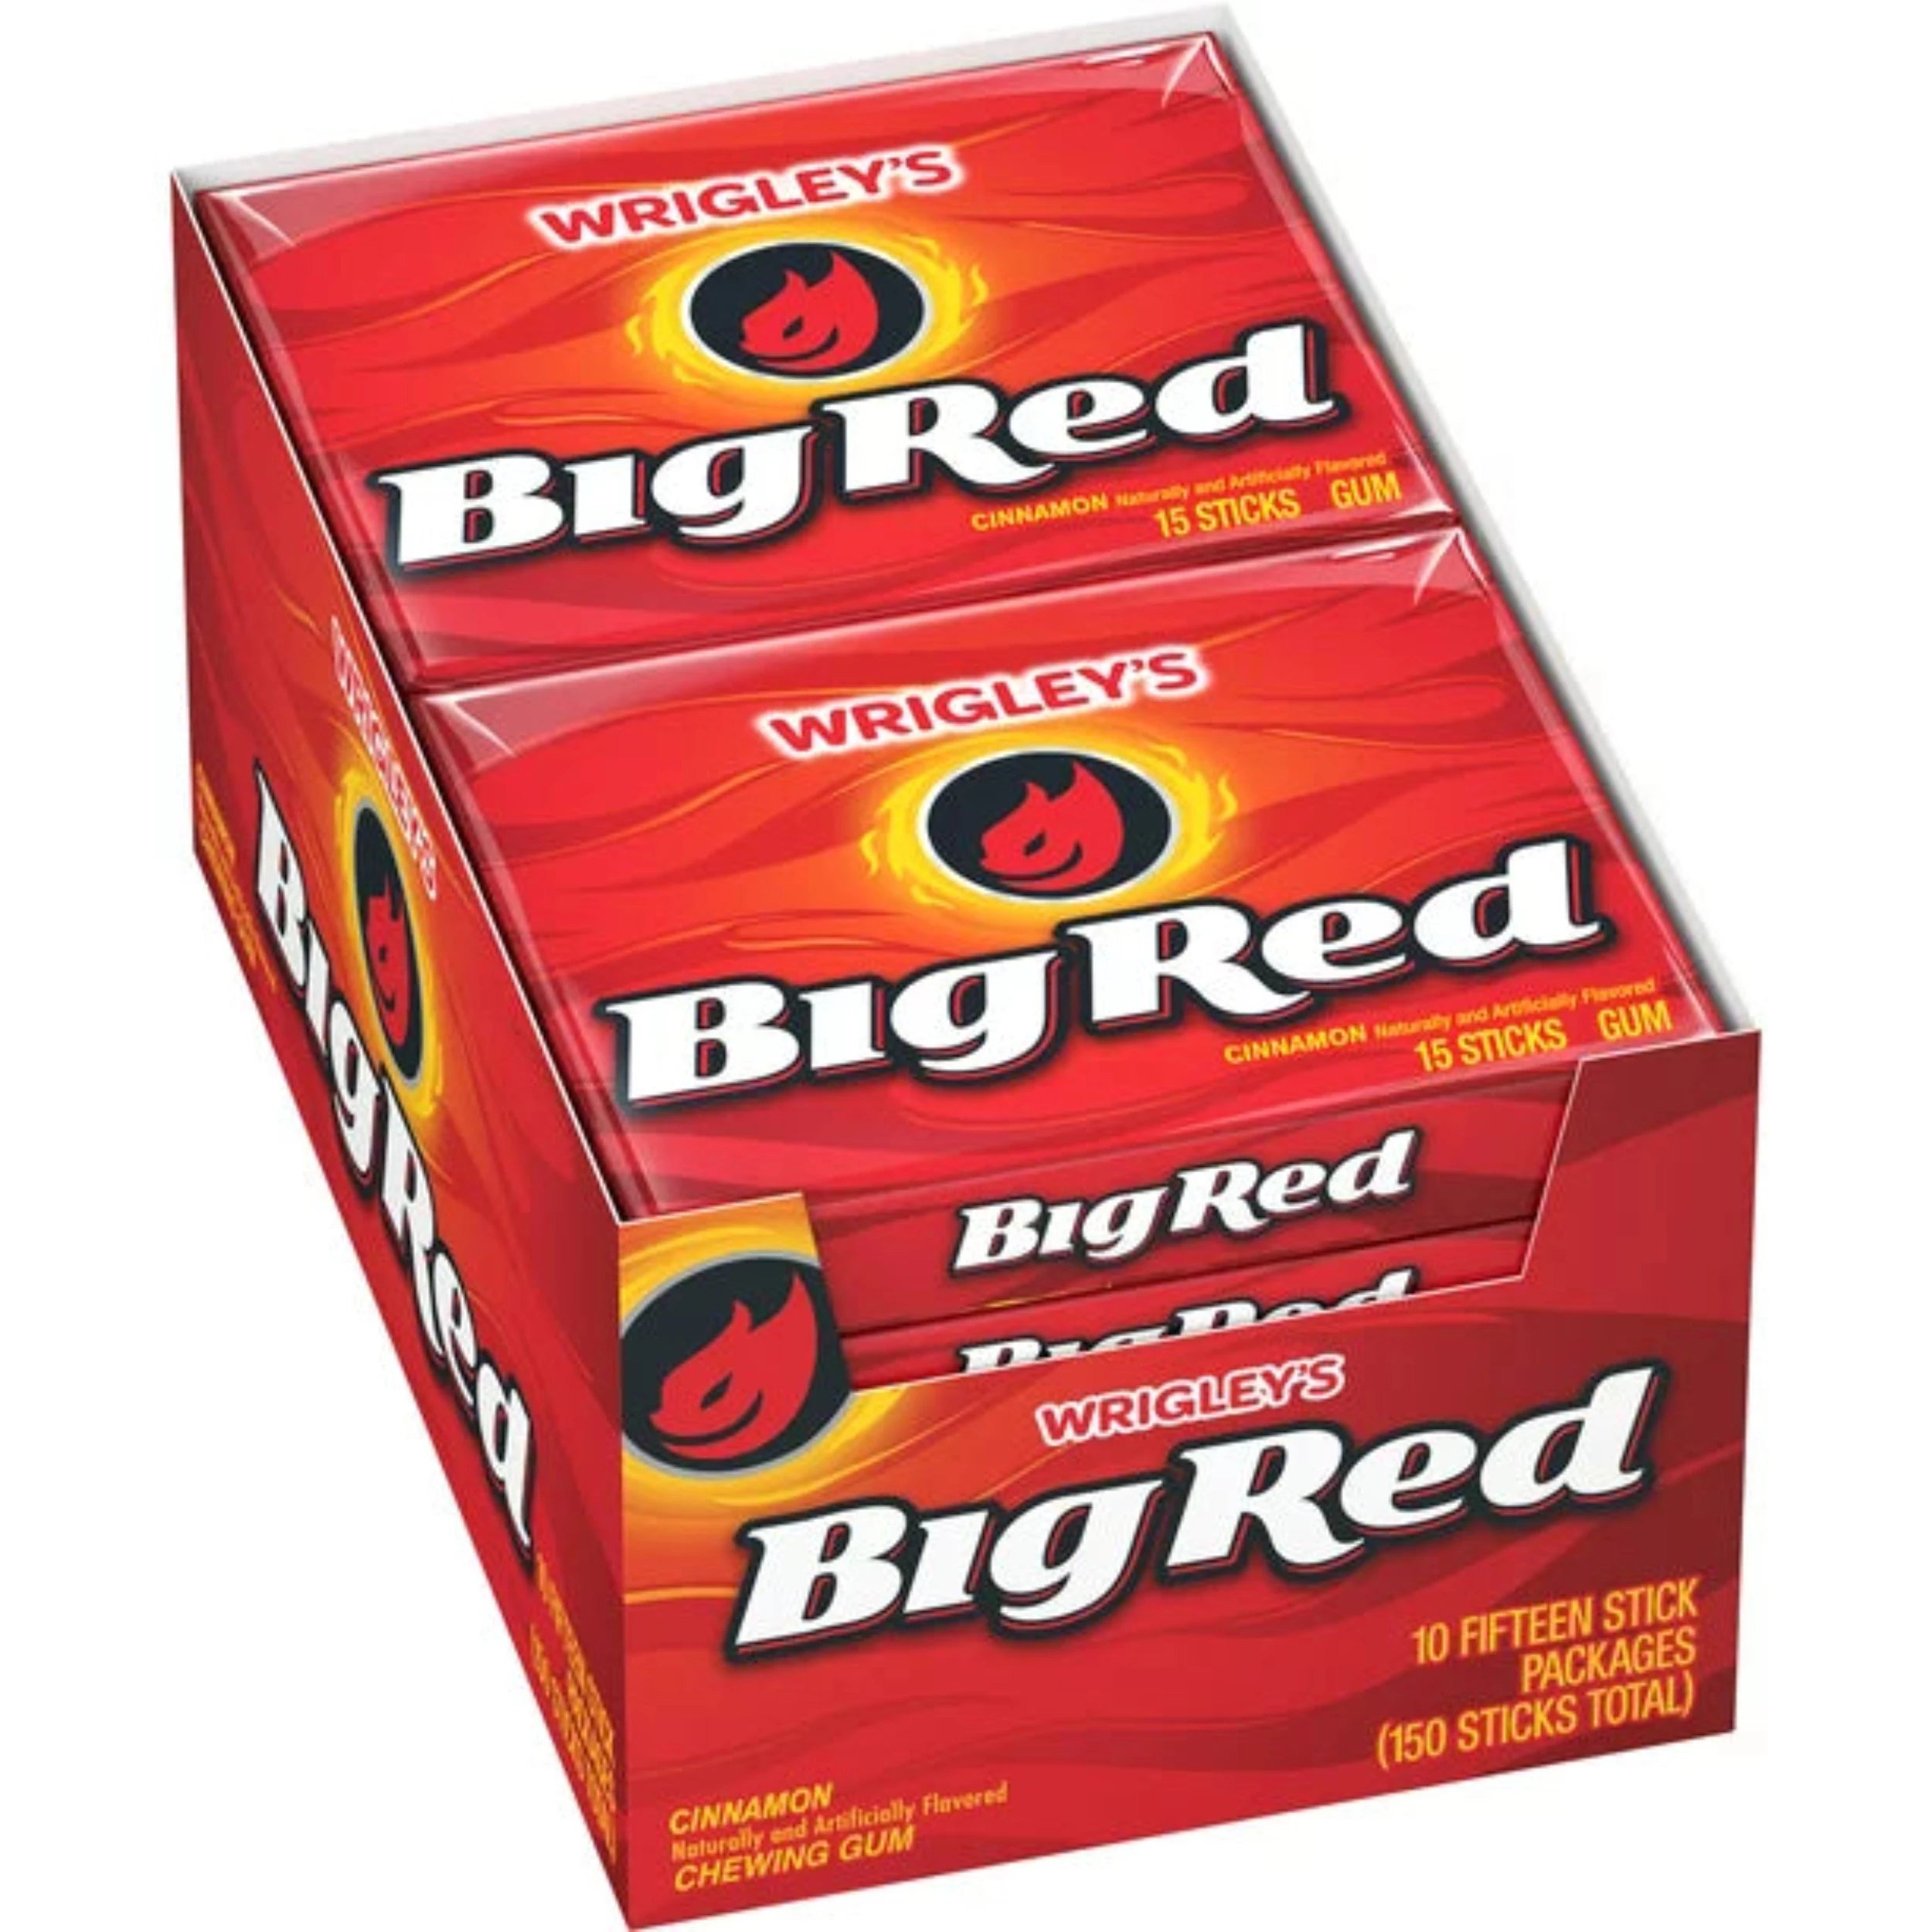 Wrigley's Big Red Cinnamon Chewing Gum (15 pieces